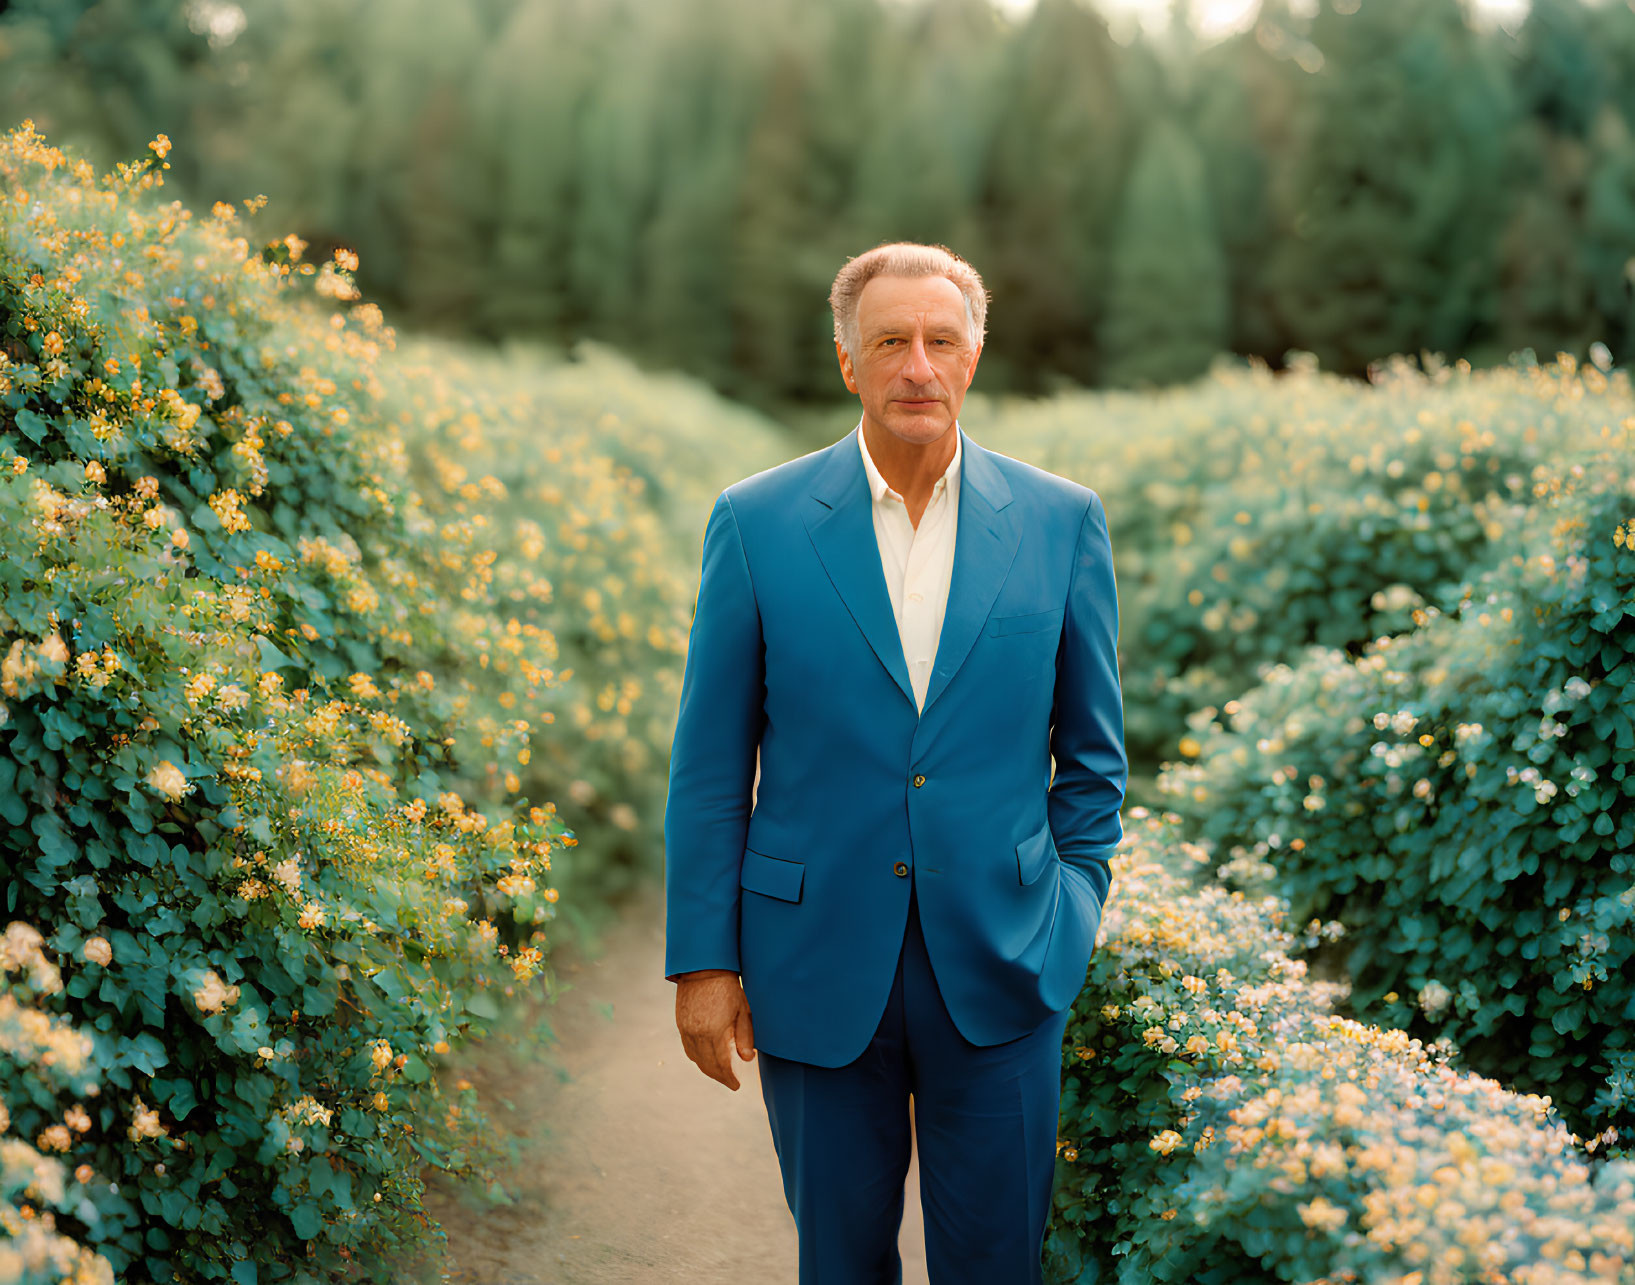 Man in Blue Suit Standing Confidently Among Green Shrubs